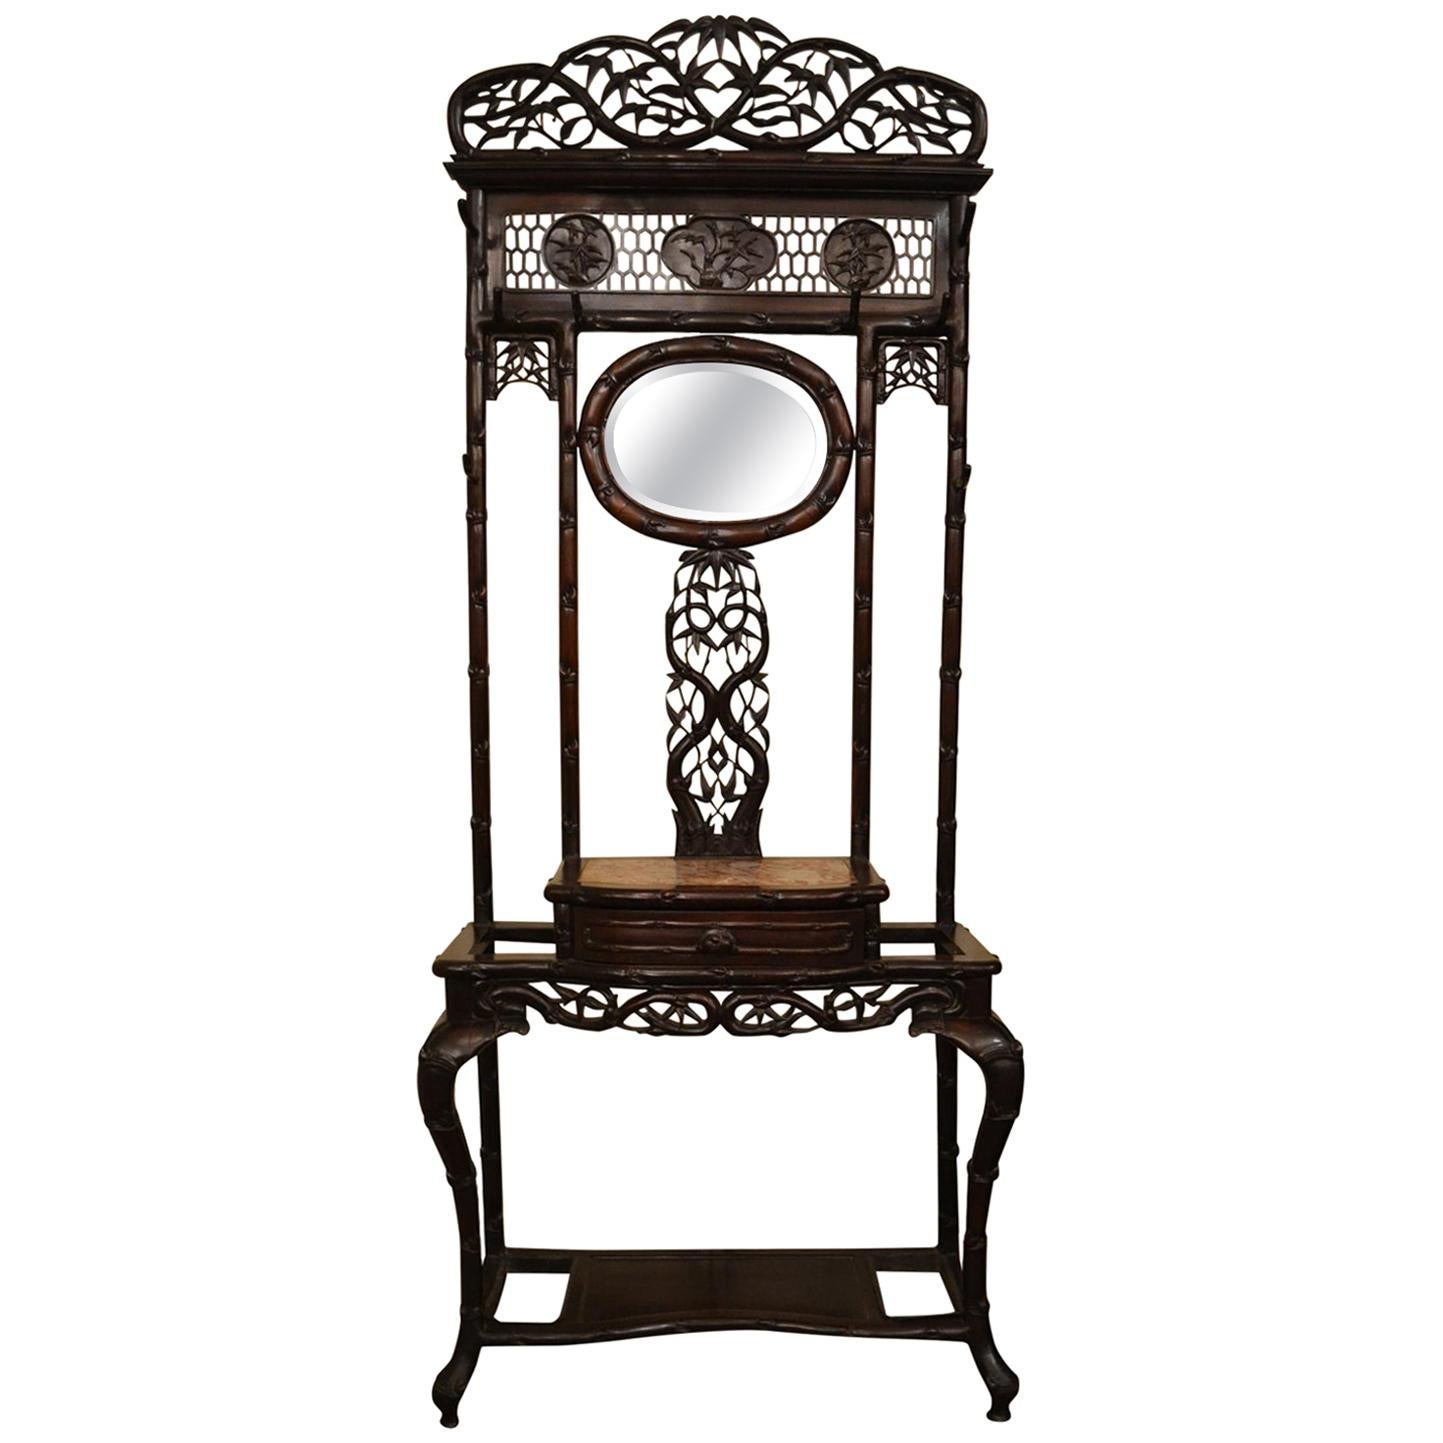 Antique Chinese Teakwood Porte-Manteau 'Hall Tree' with Small Mirror, circa 1880